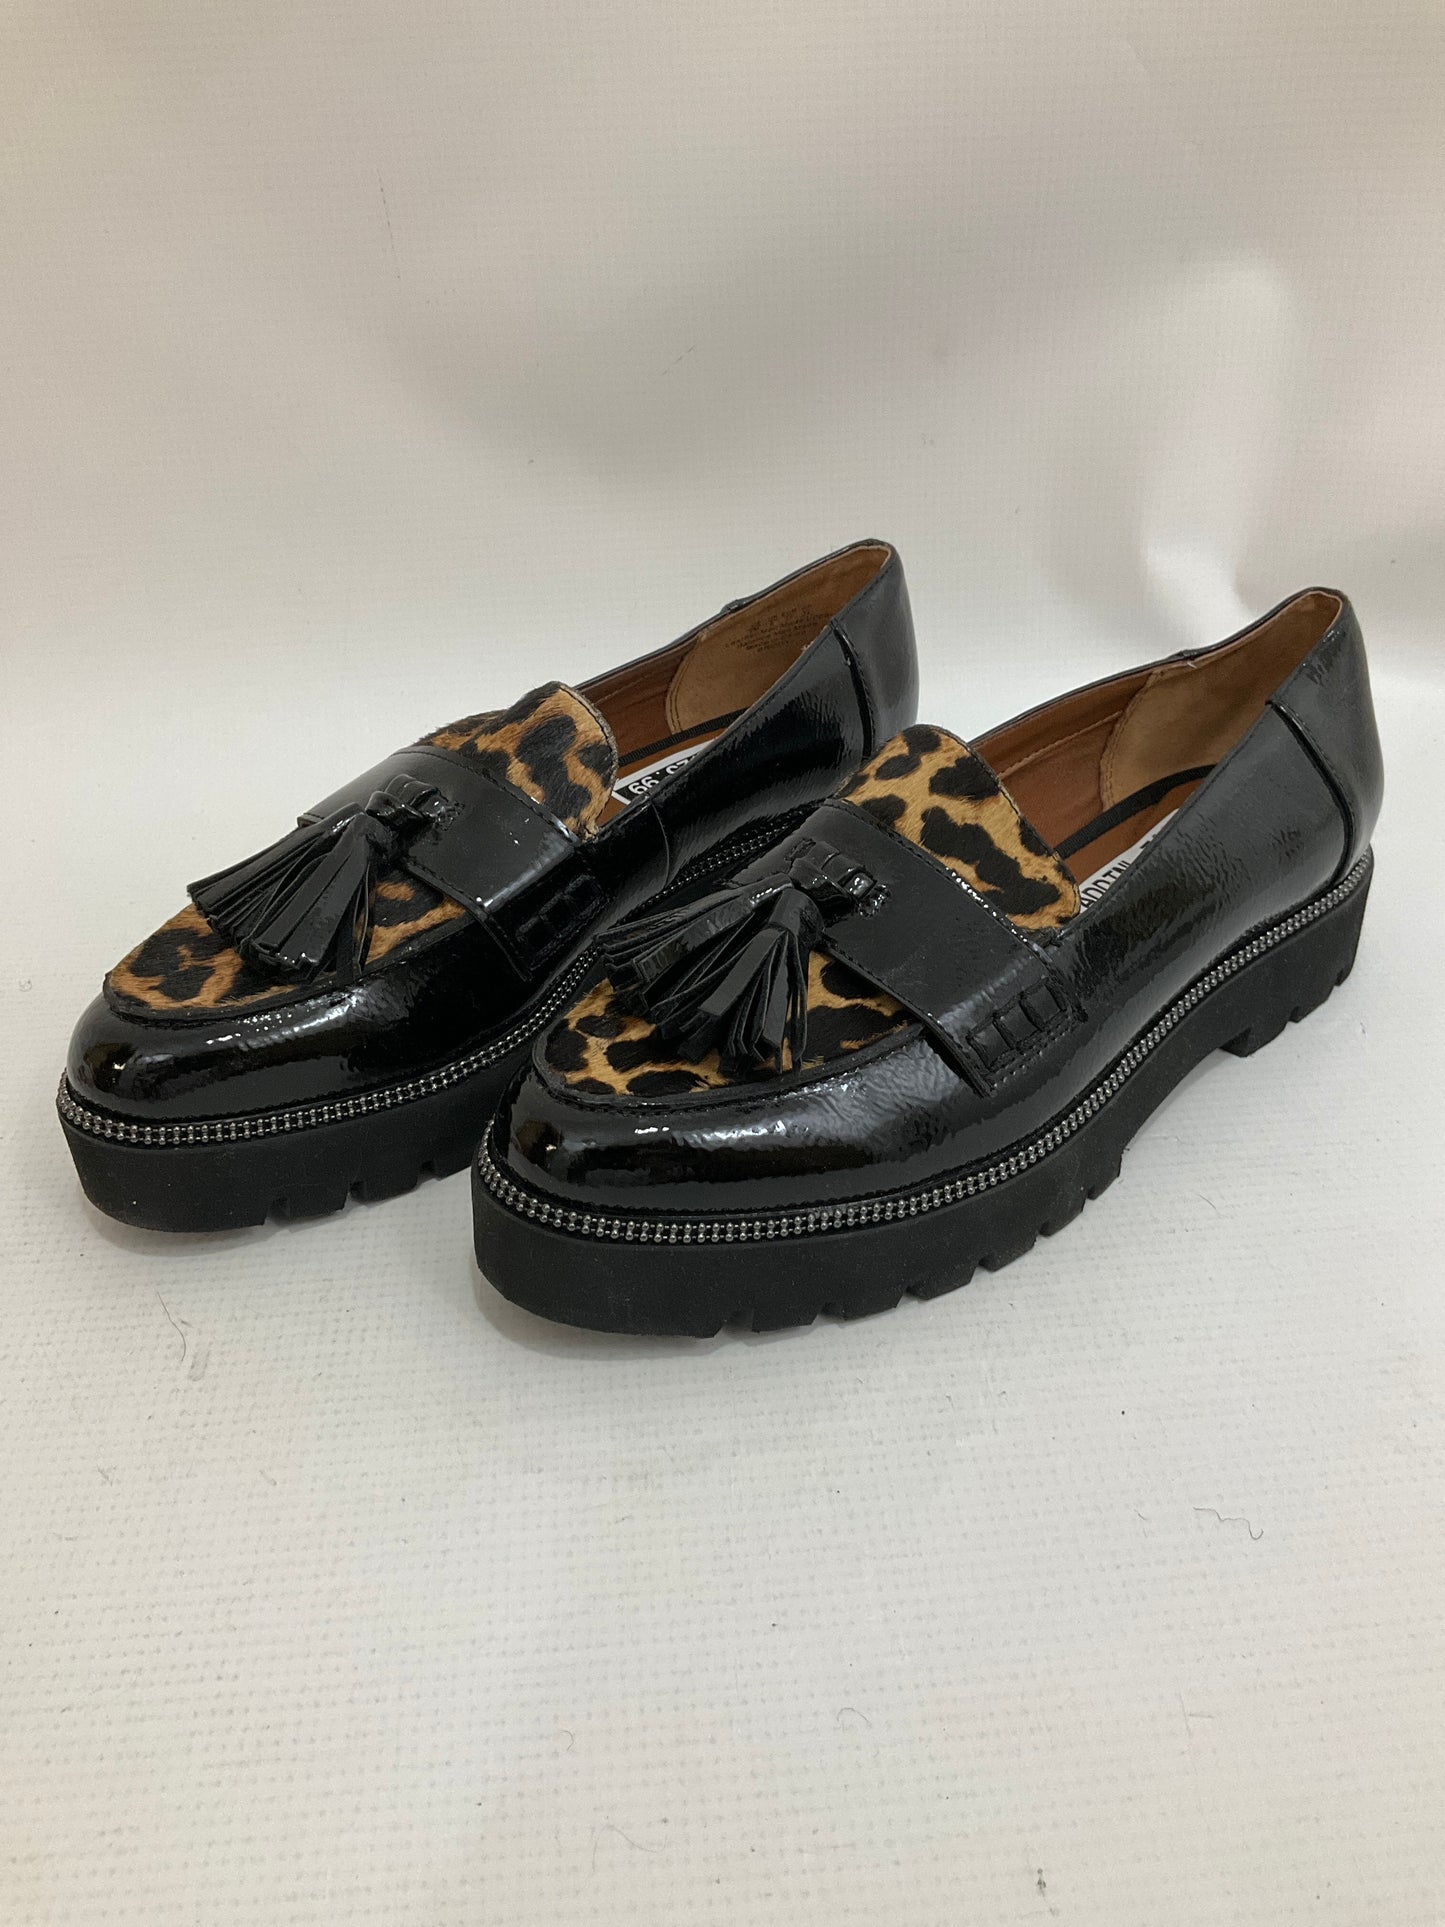 Shoes Flats Loafer Oxford By Franco Sarto  Size: 7